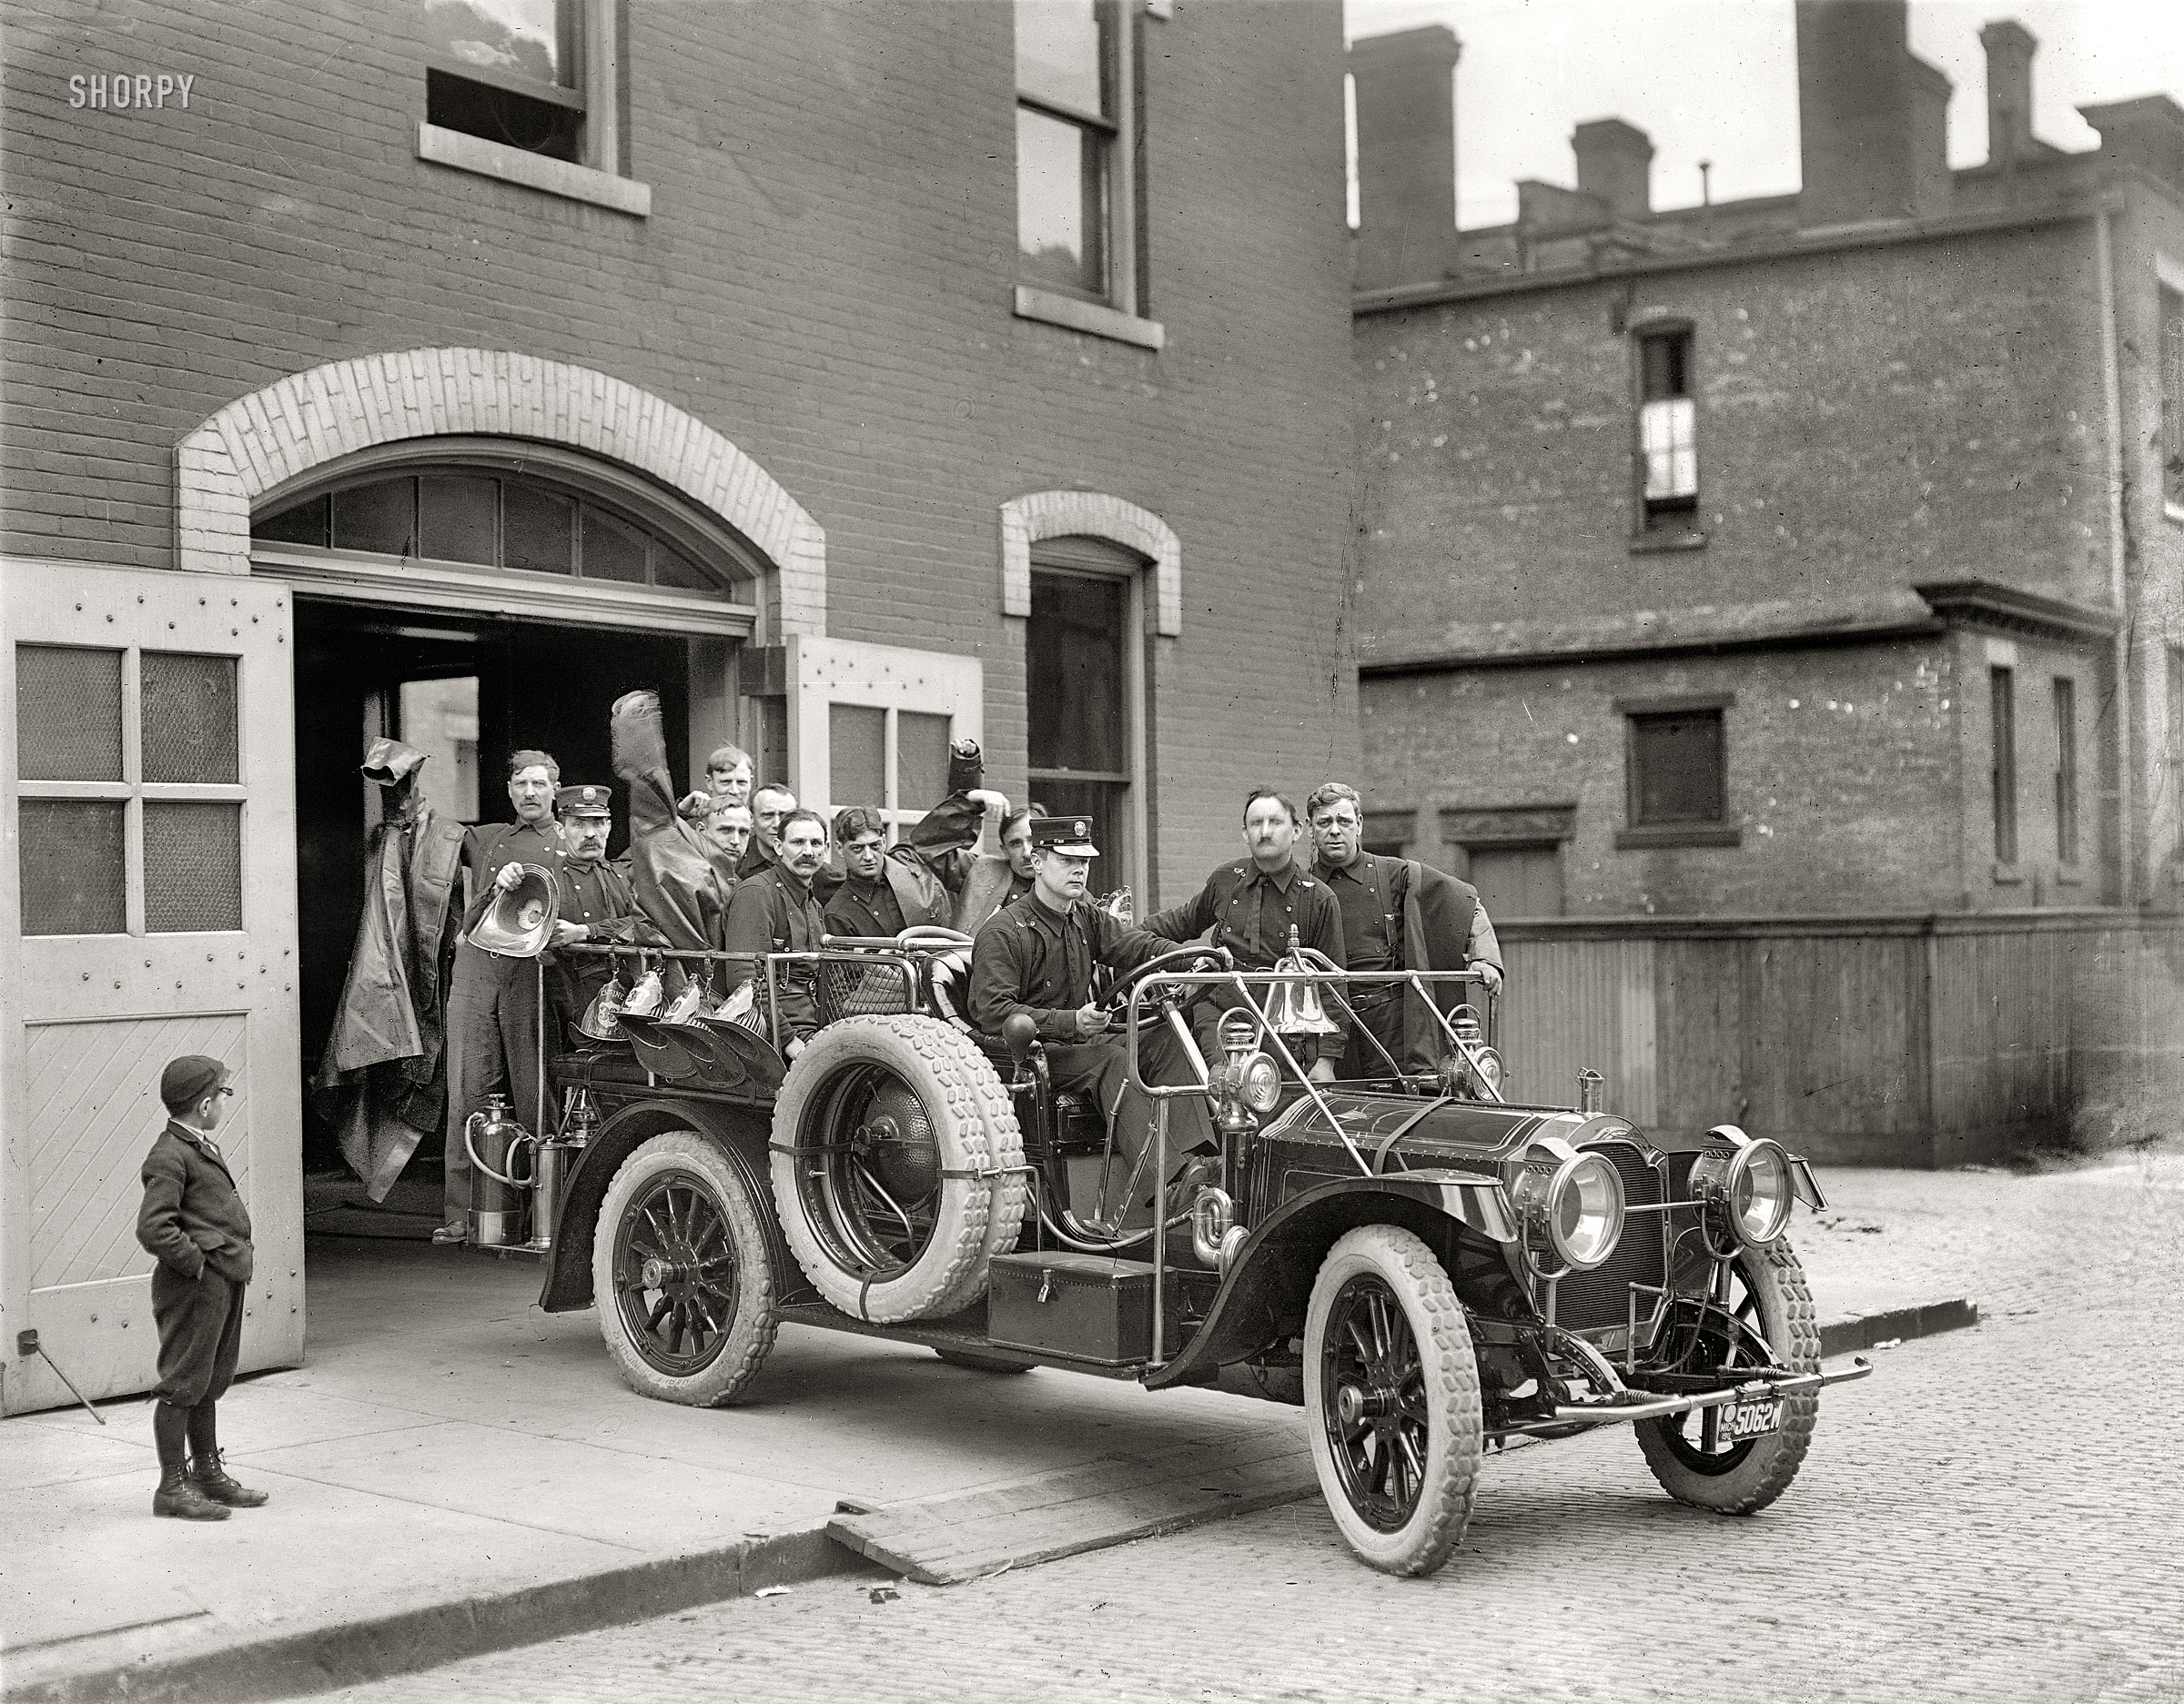 May 3, 1911. Detroit, Michigan. "Packard fire squad." Ask the fireman who owns one. 8x10 inch glass negative, Detroit Publishing Company. View full size.